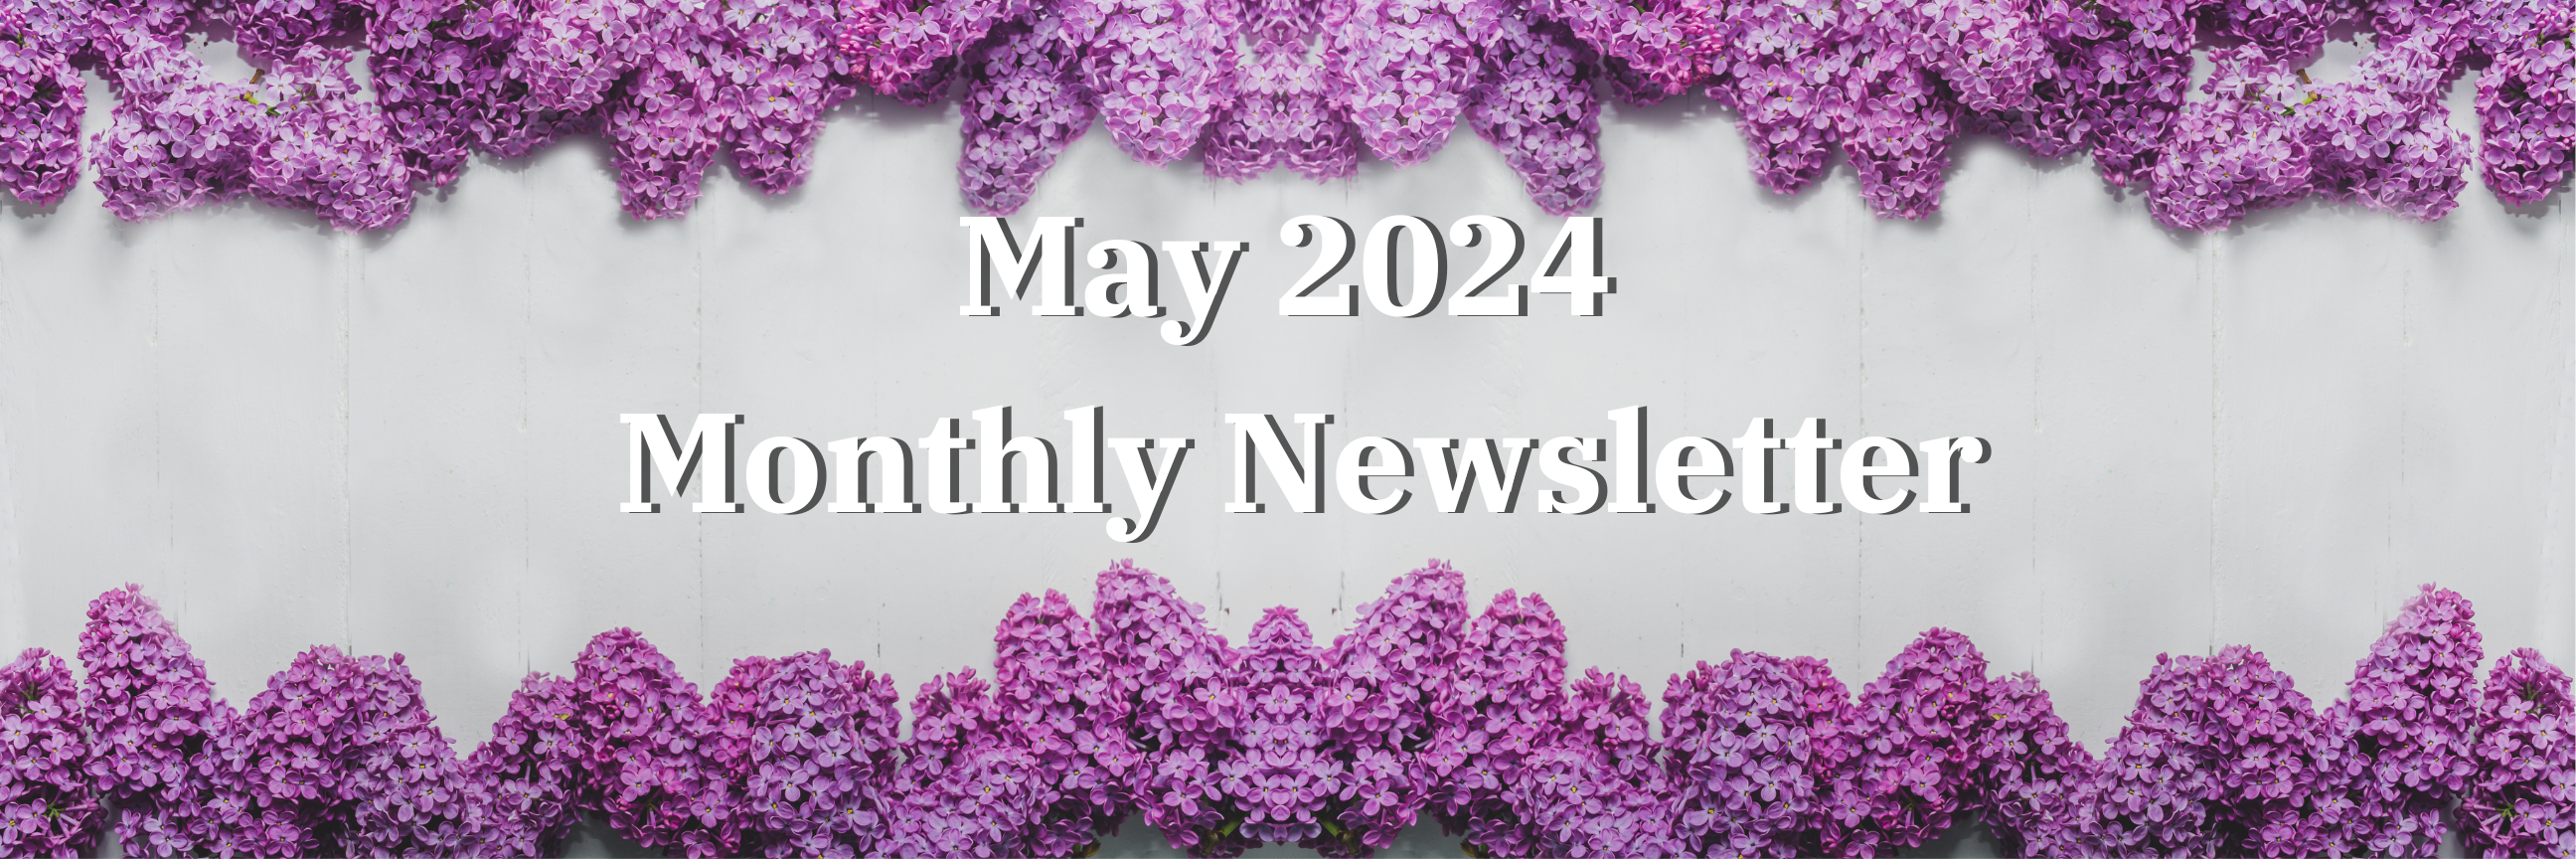 May 2024 Newsletter Cover